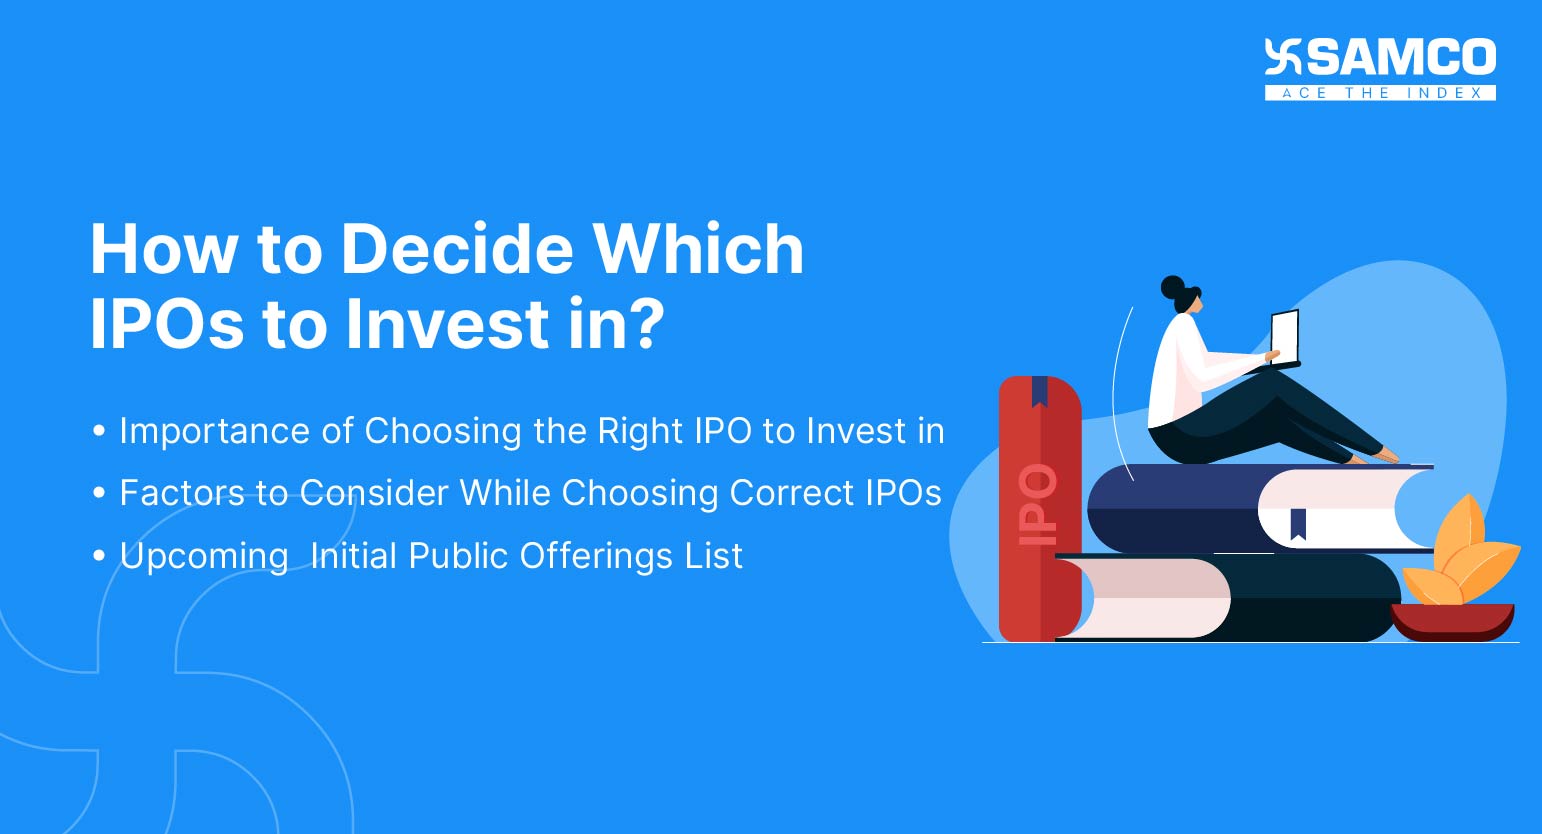 How to Decide Which IPOs to Invest in